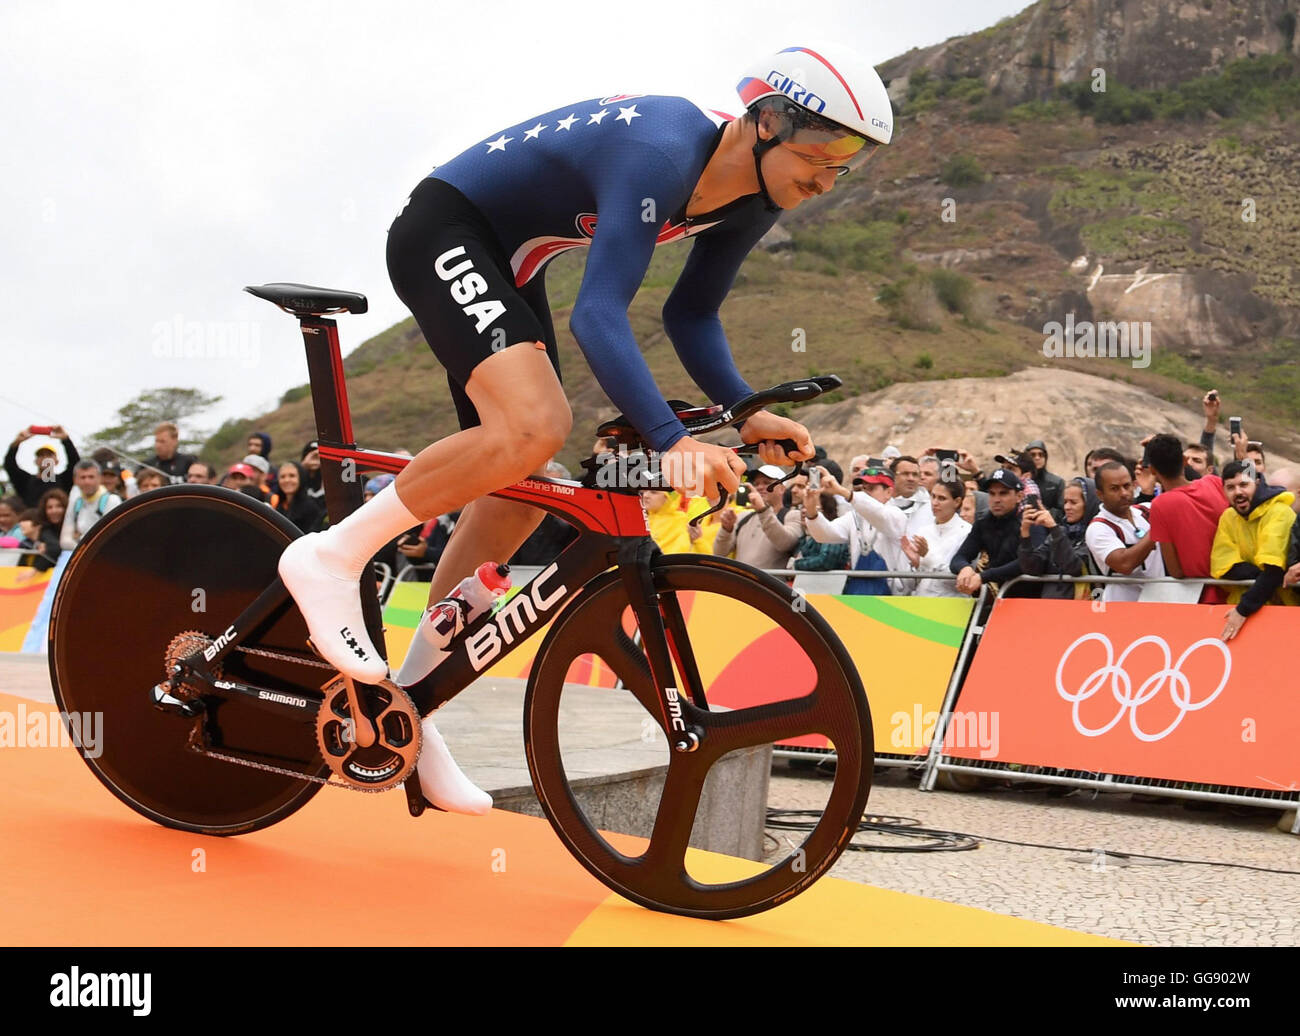 Rio de Janeiro, Brazil. 10th Aug, 2016. Taylor Phinney of the USA at the start of the men's Individual Time Trial of the Rio 2016 Olympic Games Road Cycling events at Pontal in Rio de Janeiro, Brazil, 10 August 2016. Photo: Sebastian Kahnert/dpa/Alamy Live News Stock Photo